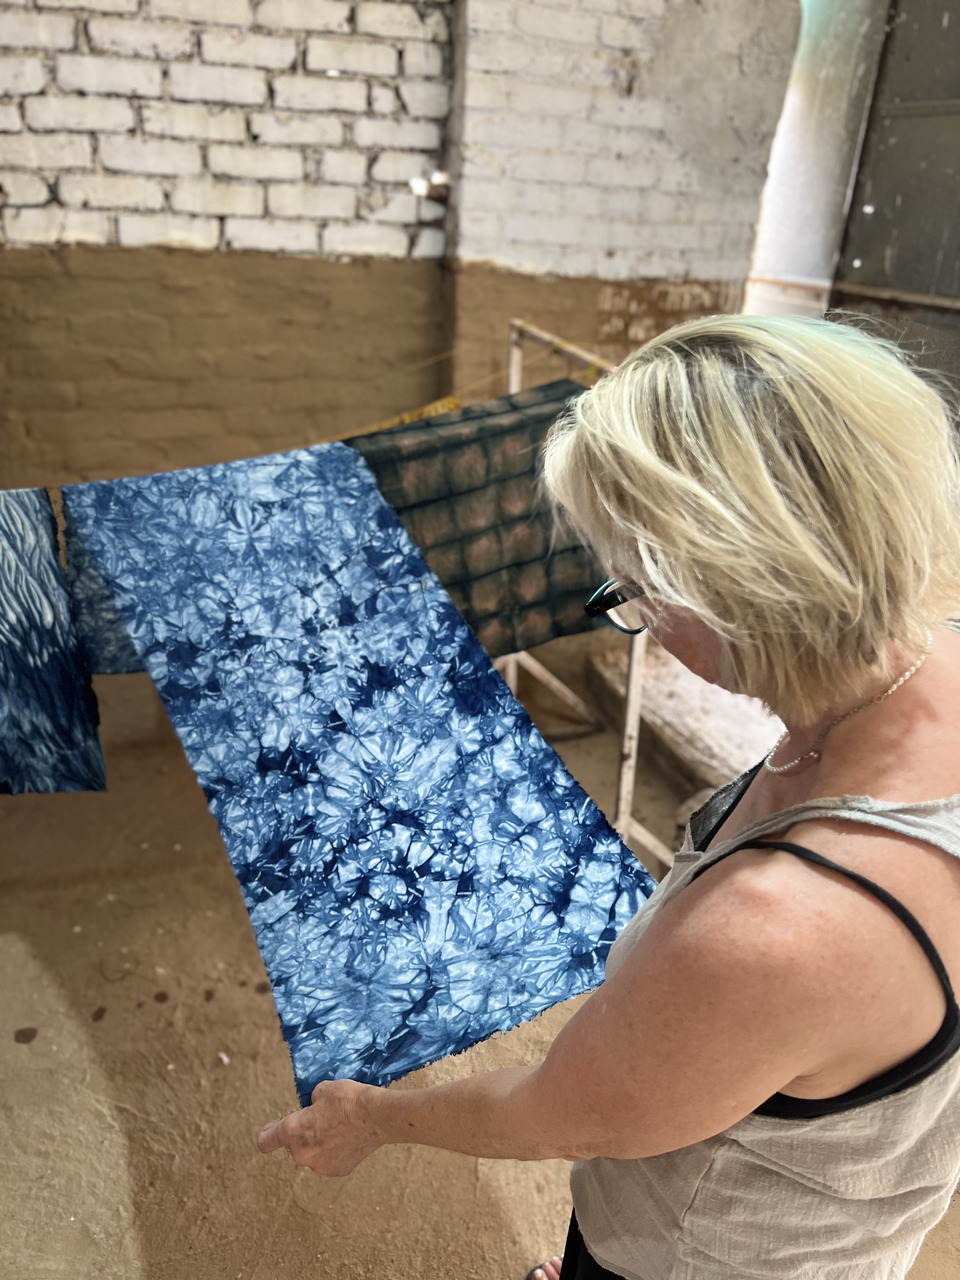 A woman carefully observing the indigo tie and die small fabric swatch created by her.